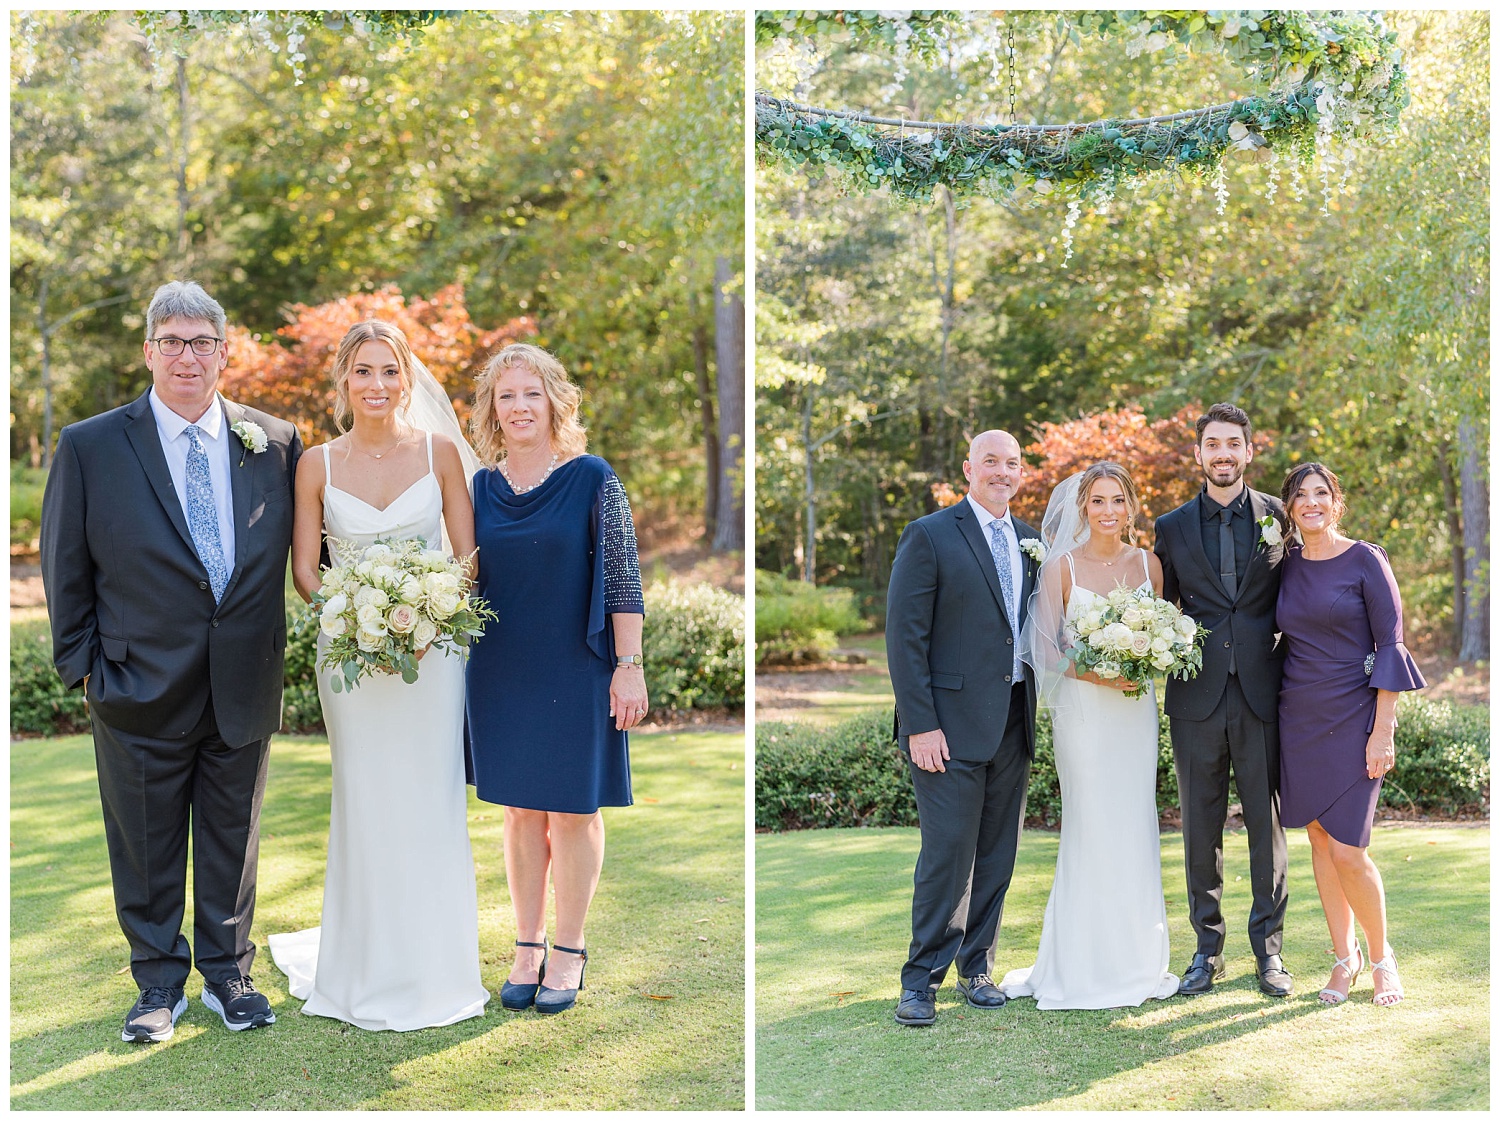 family formals at Chapel Hill Carriage House in North Carolina